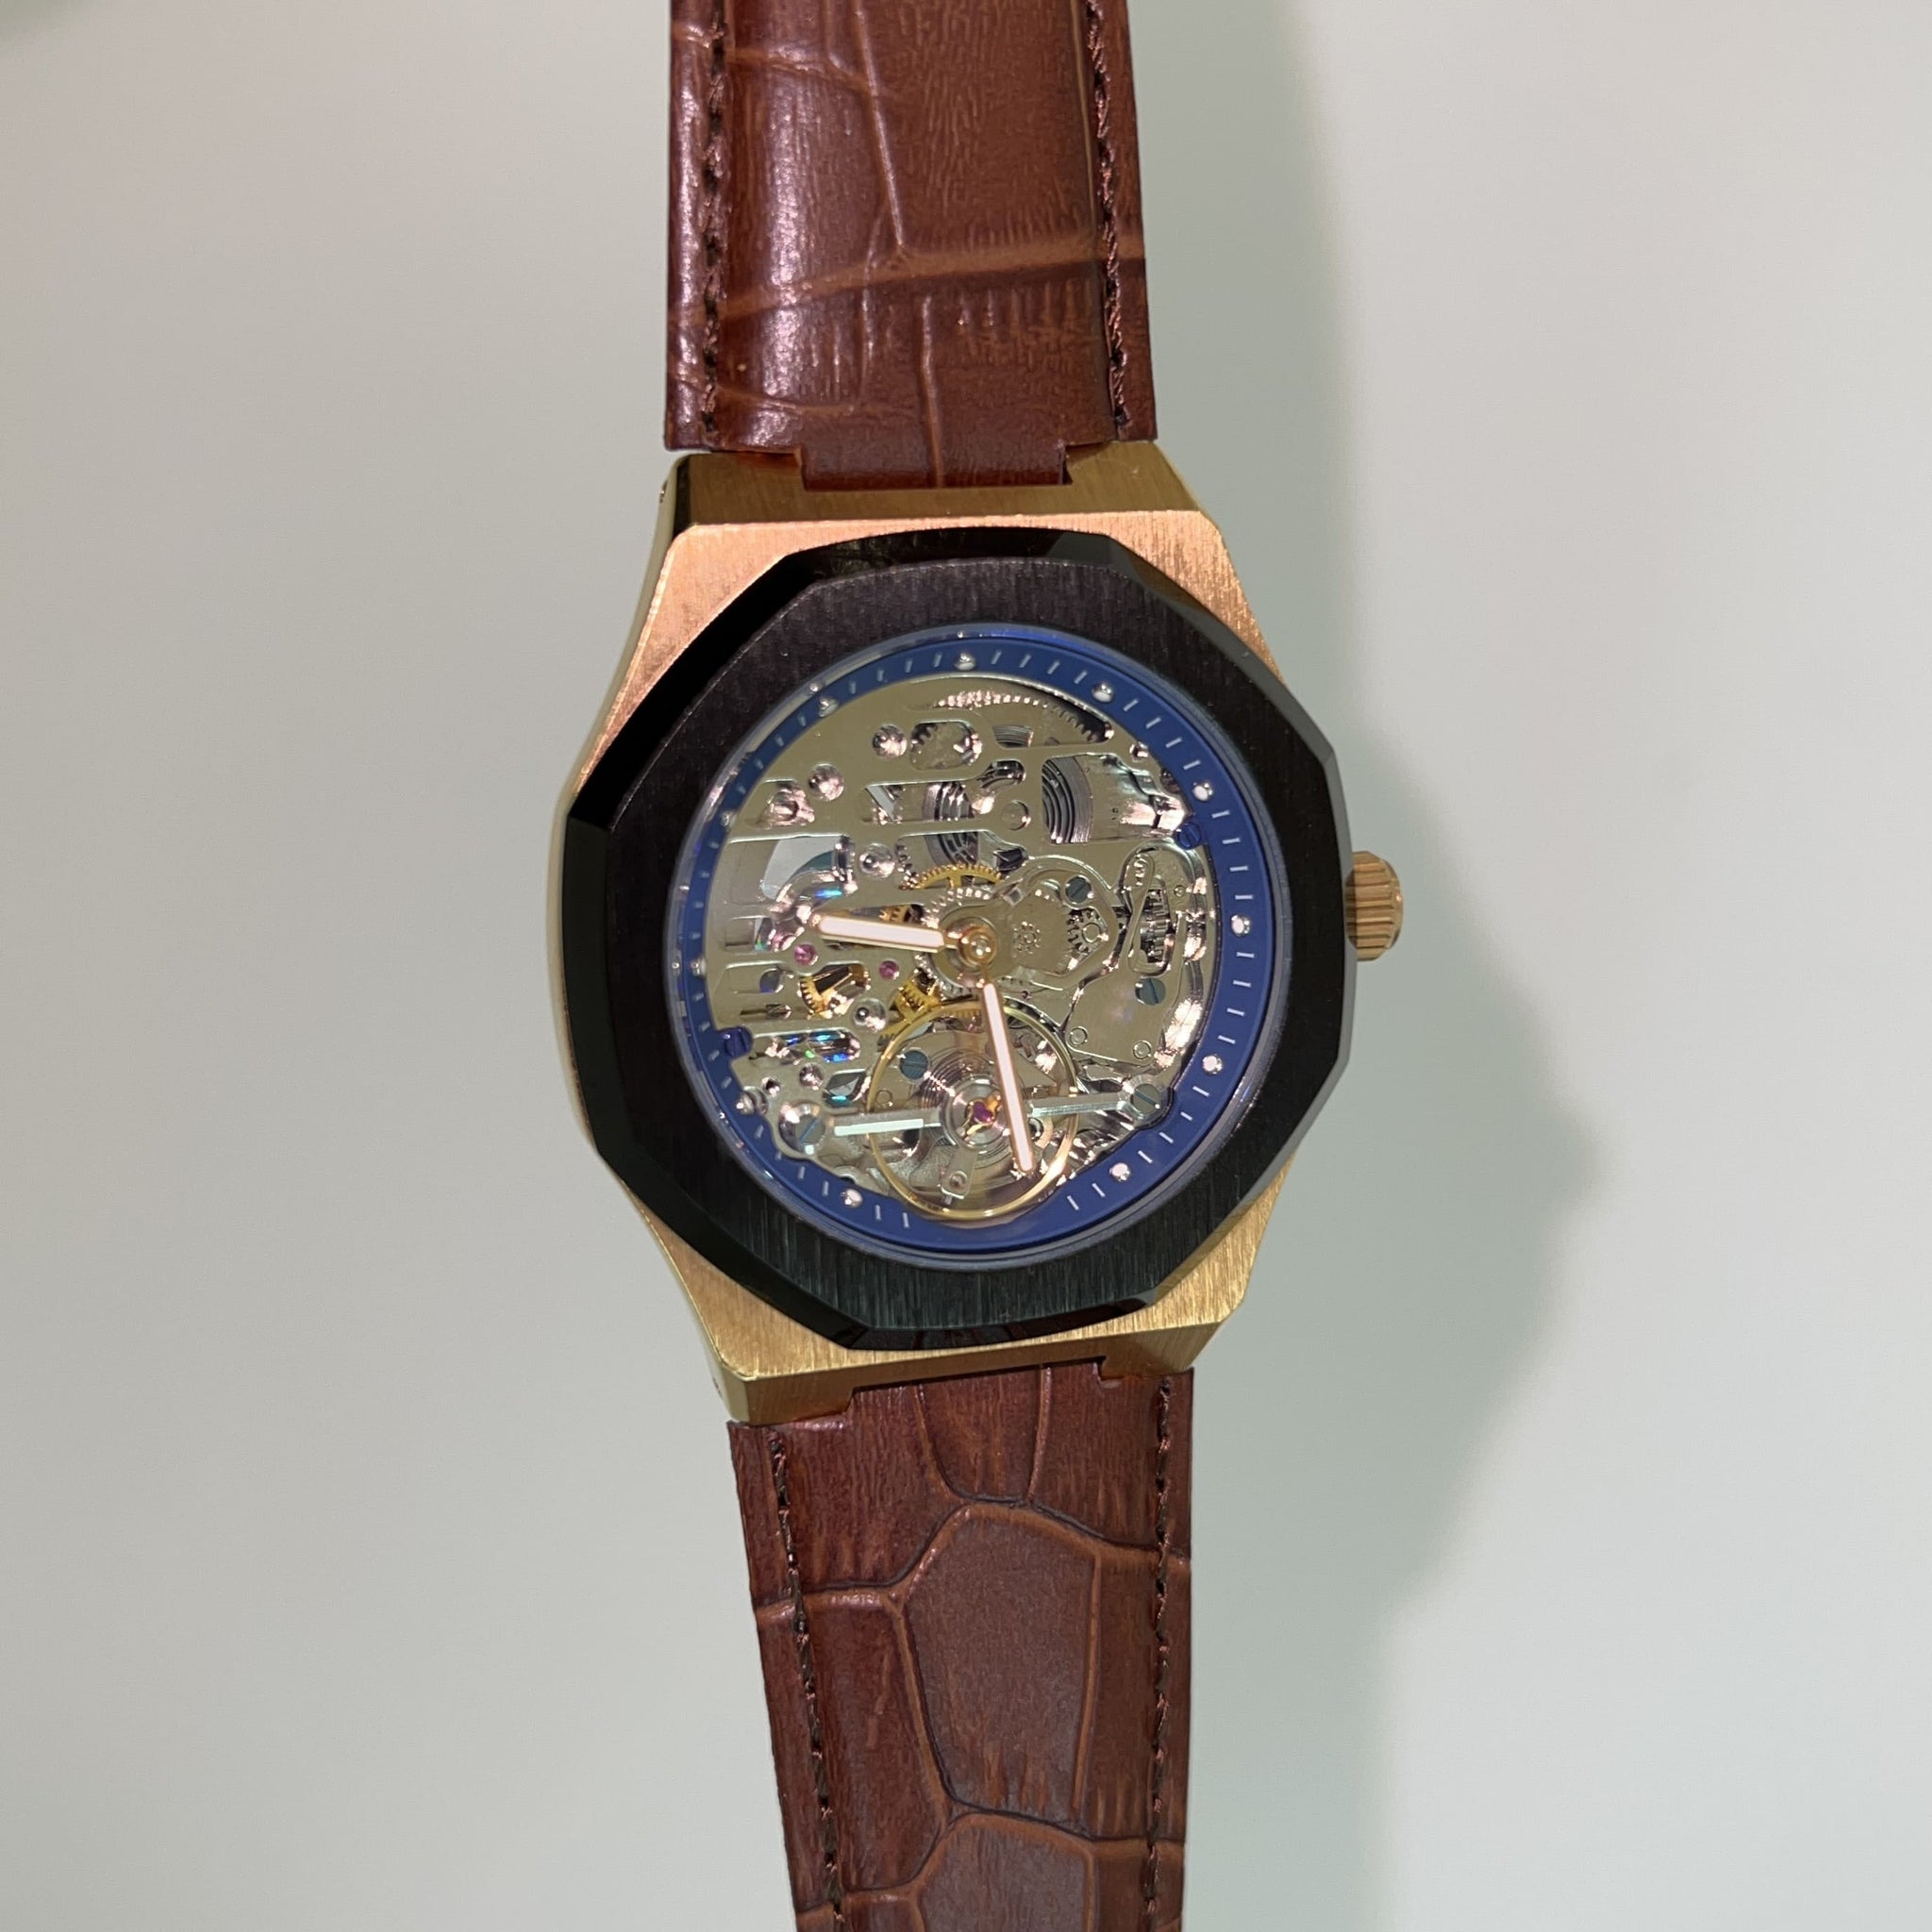 Prince watch - Sehgal Watches - Gold / Black / Blue / Brown - 40mm